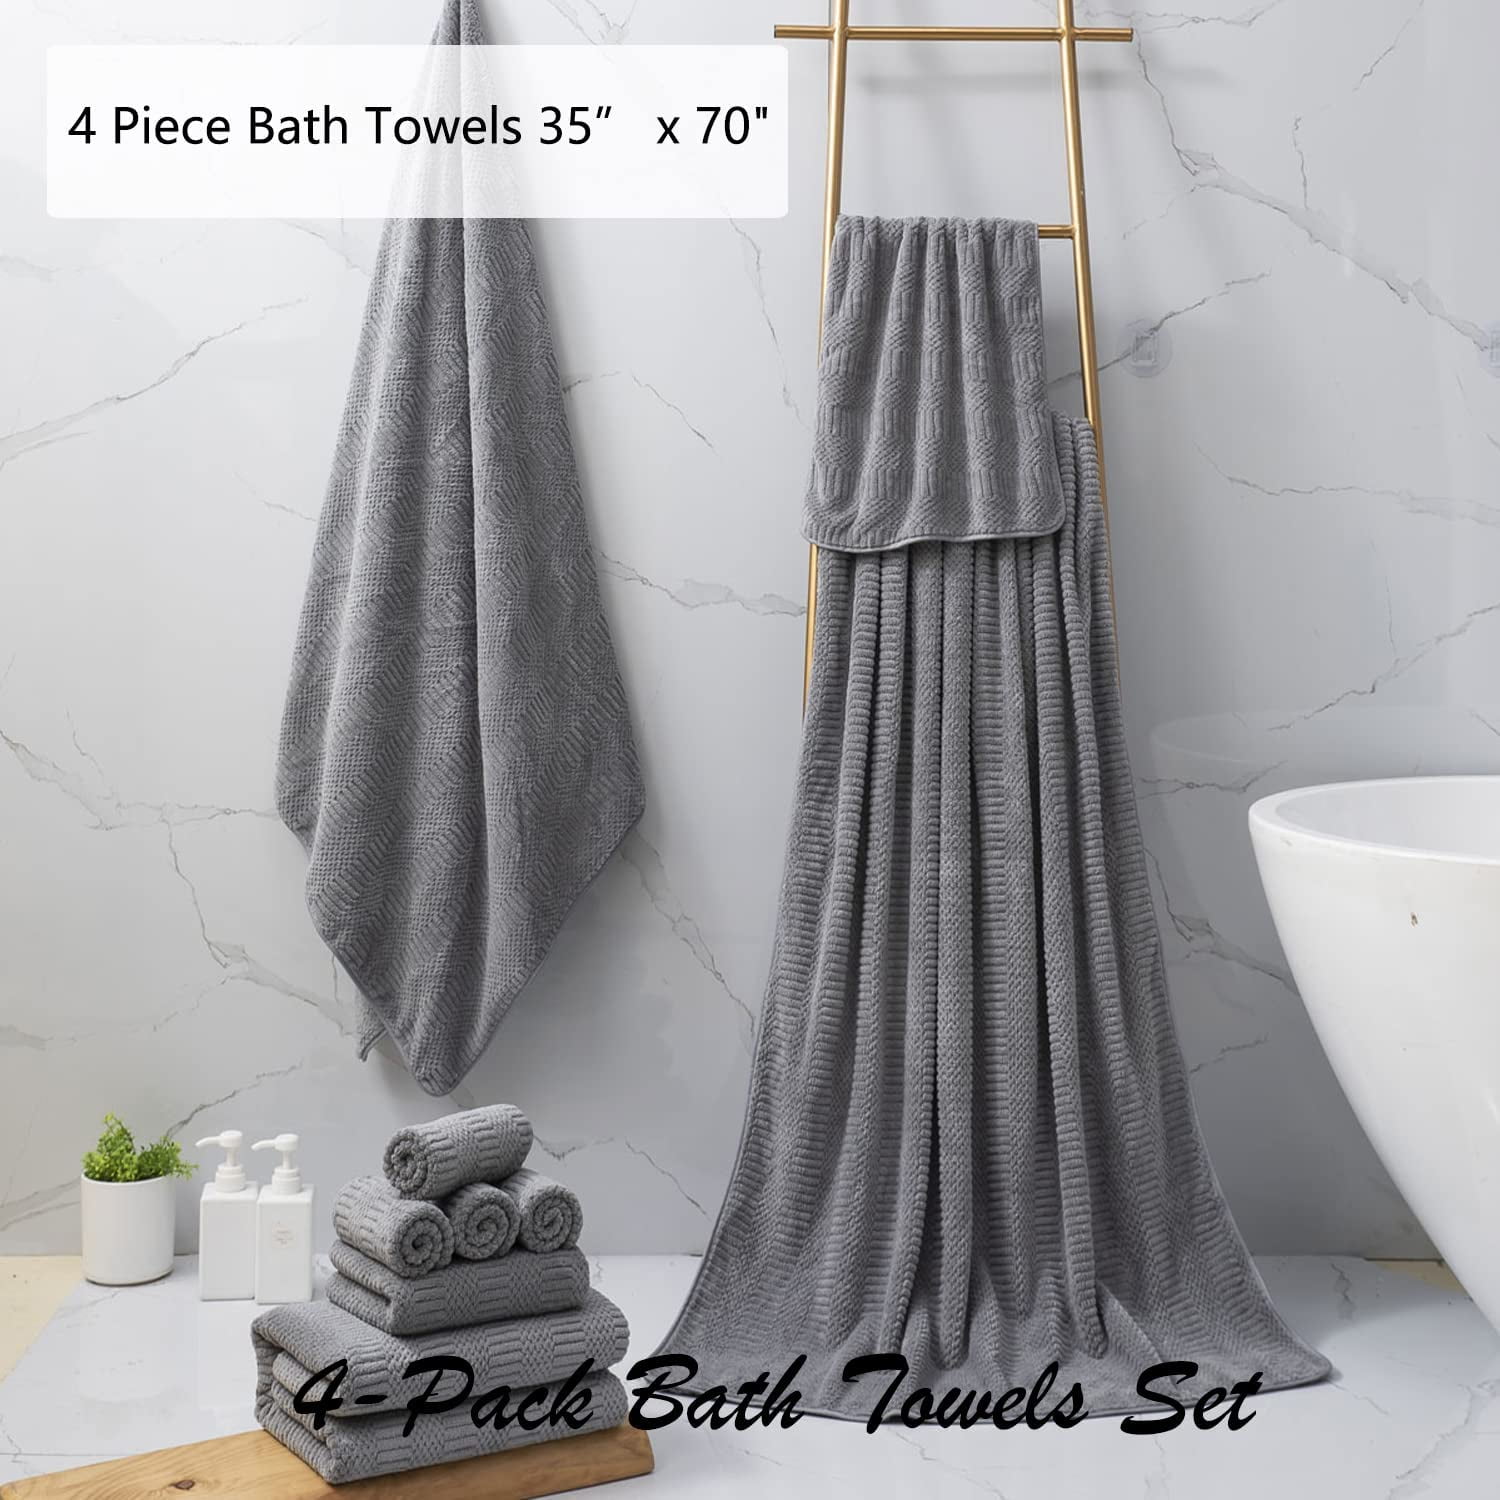 Buy MAFATLAL Towels for Bath Large Size (76x152 cms) - 600 GSM